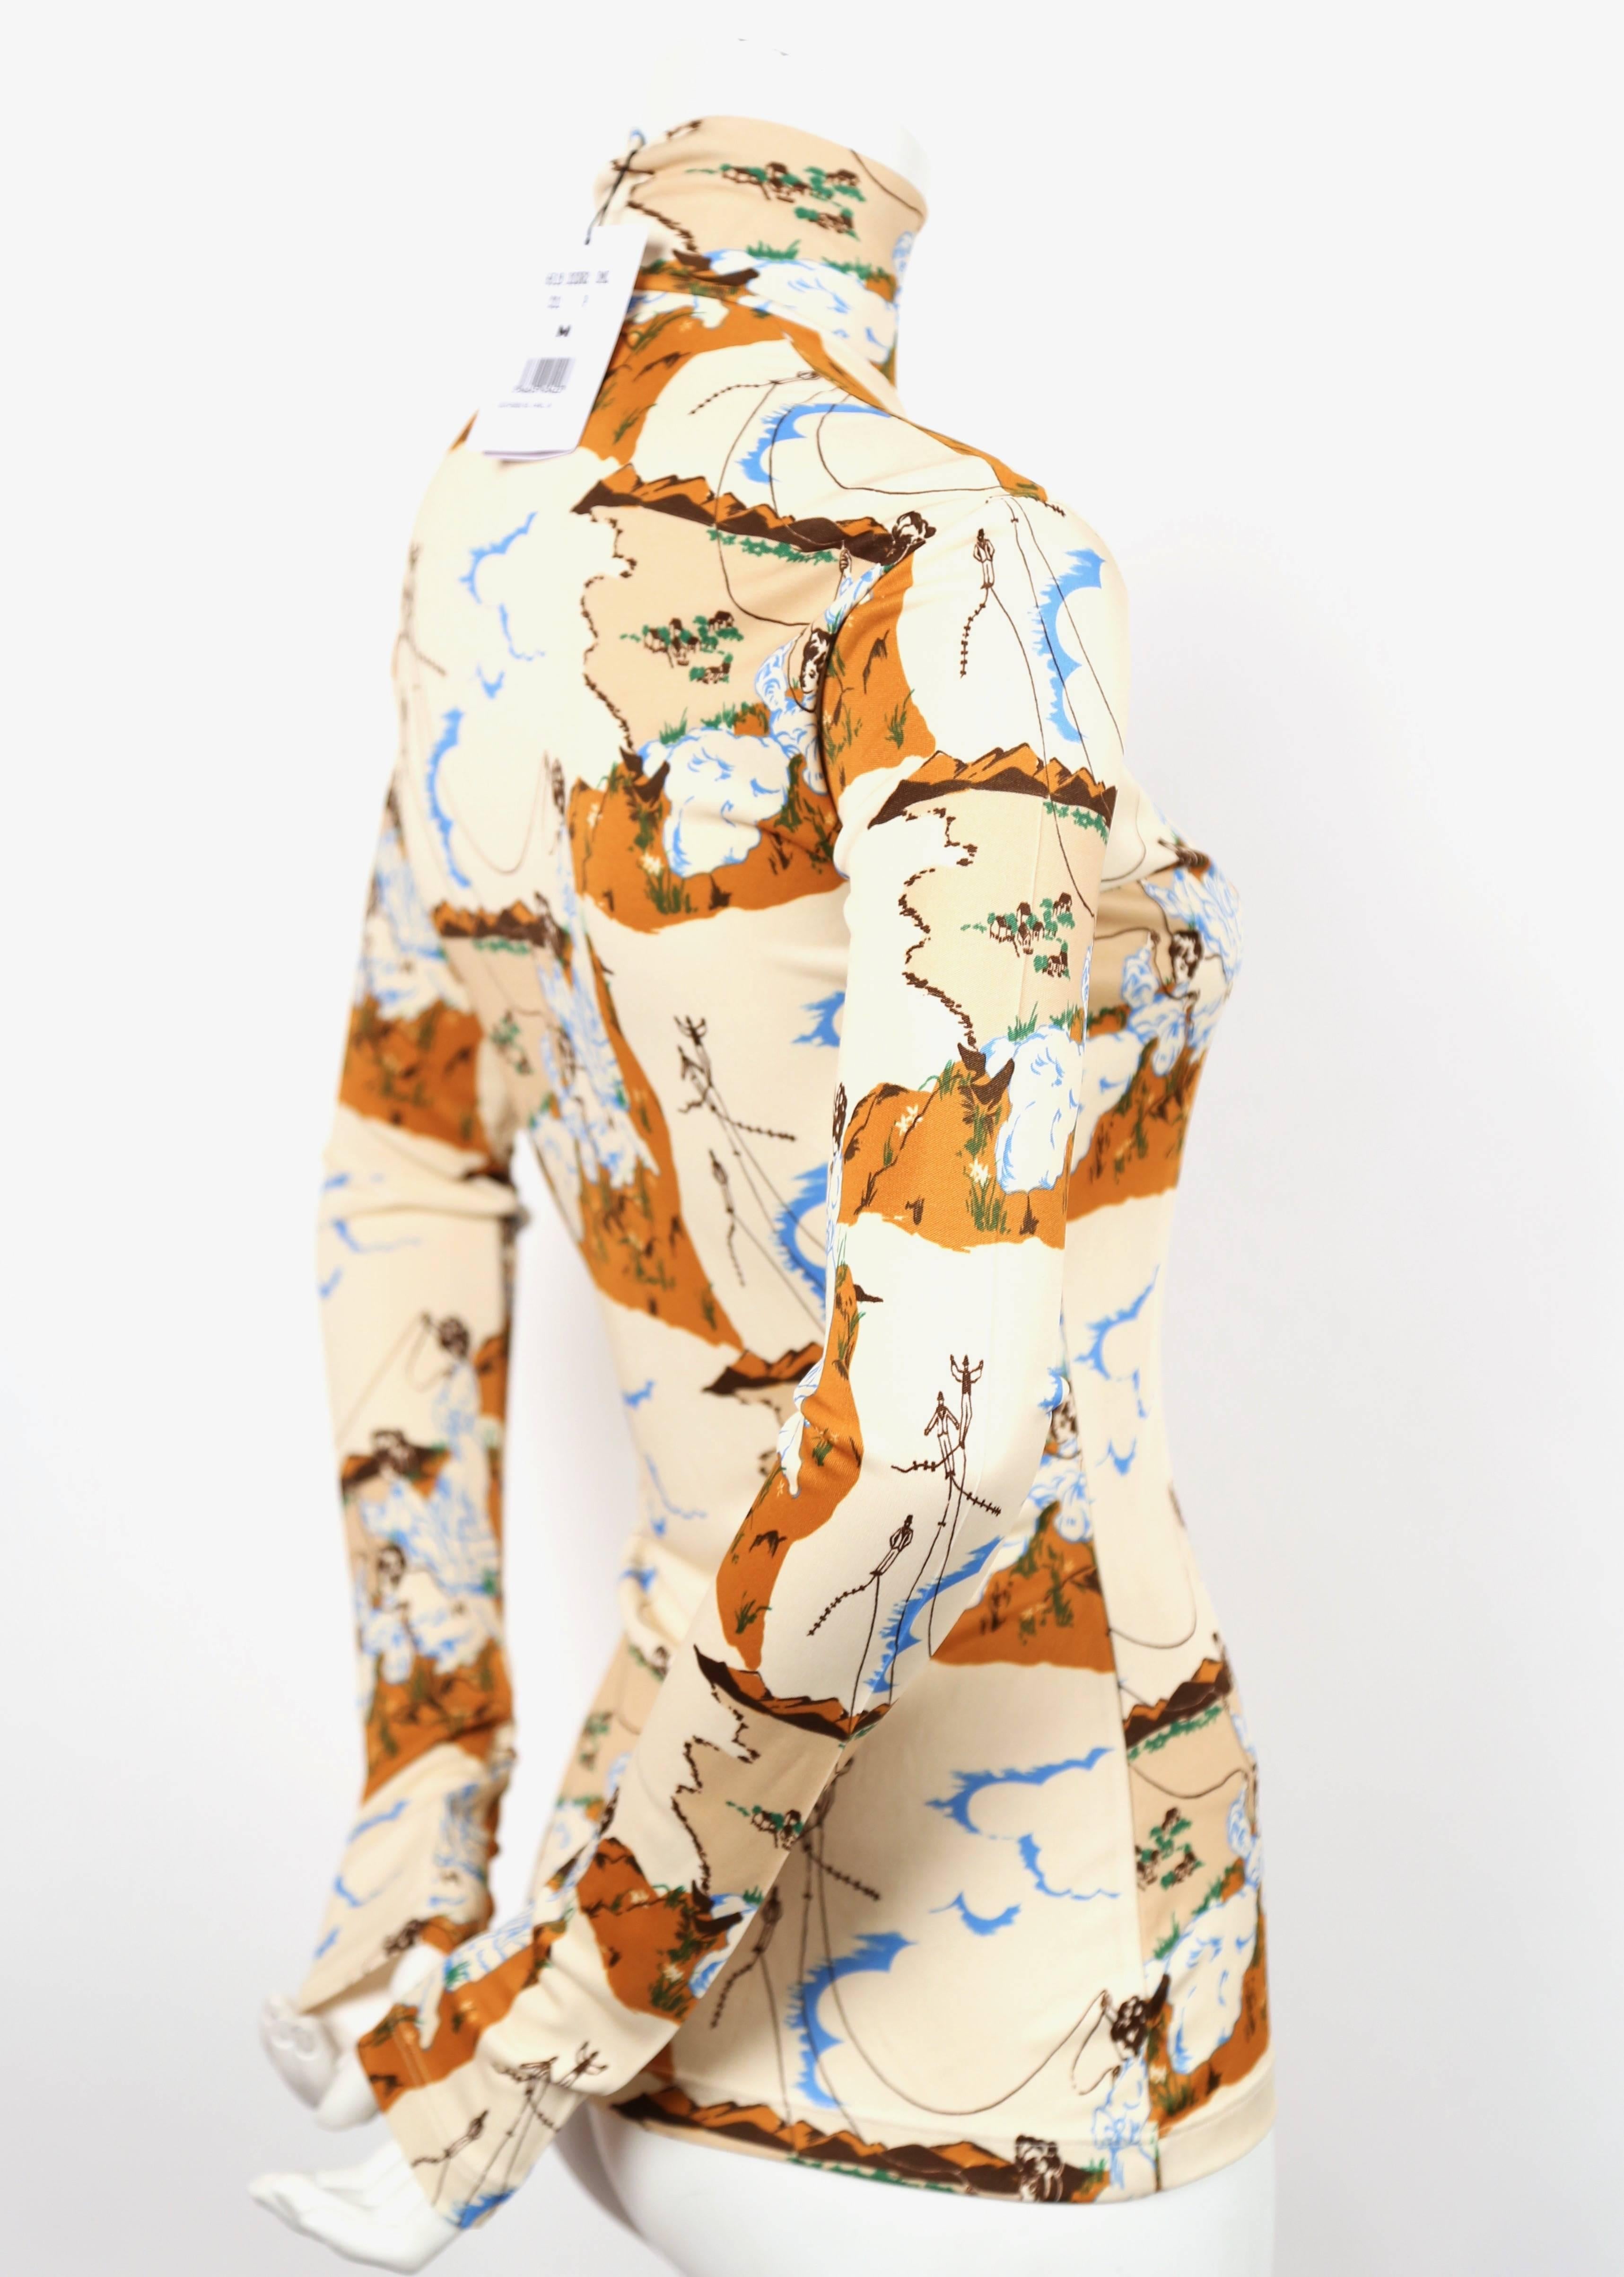 Sold out printed turtleneck designed by Phoebe Philo for Celine dating to spring 2018.
French size M but fits small. Approximate measurements: bust 34